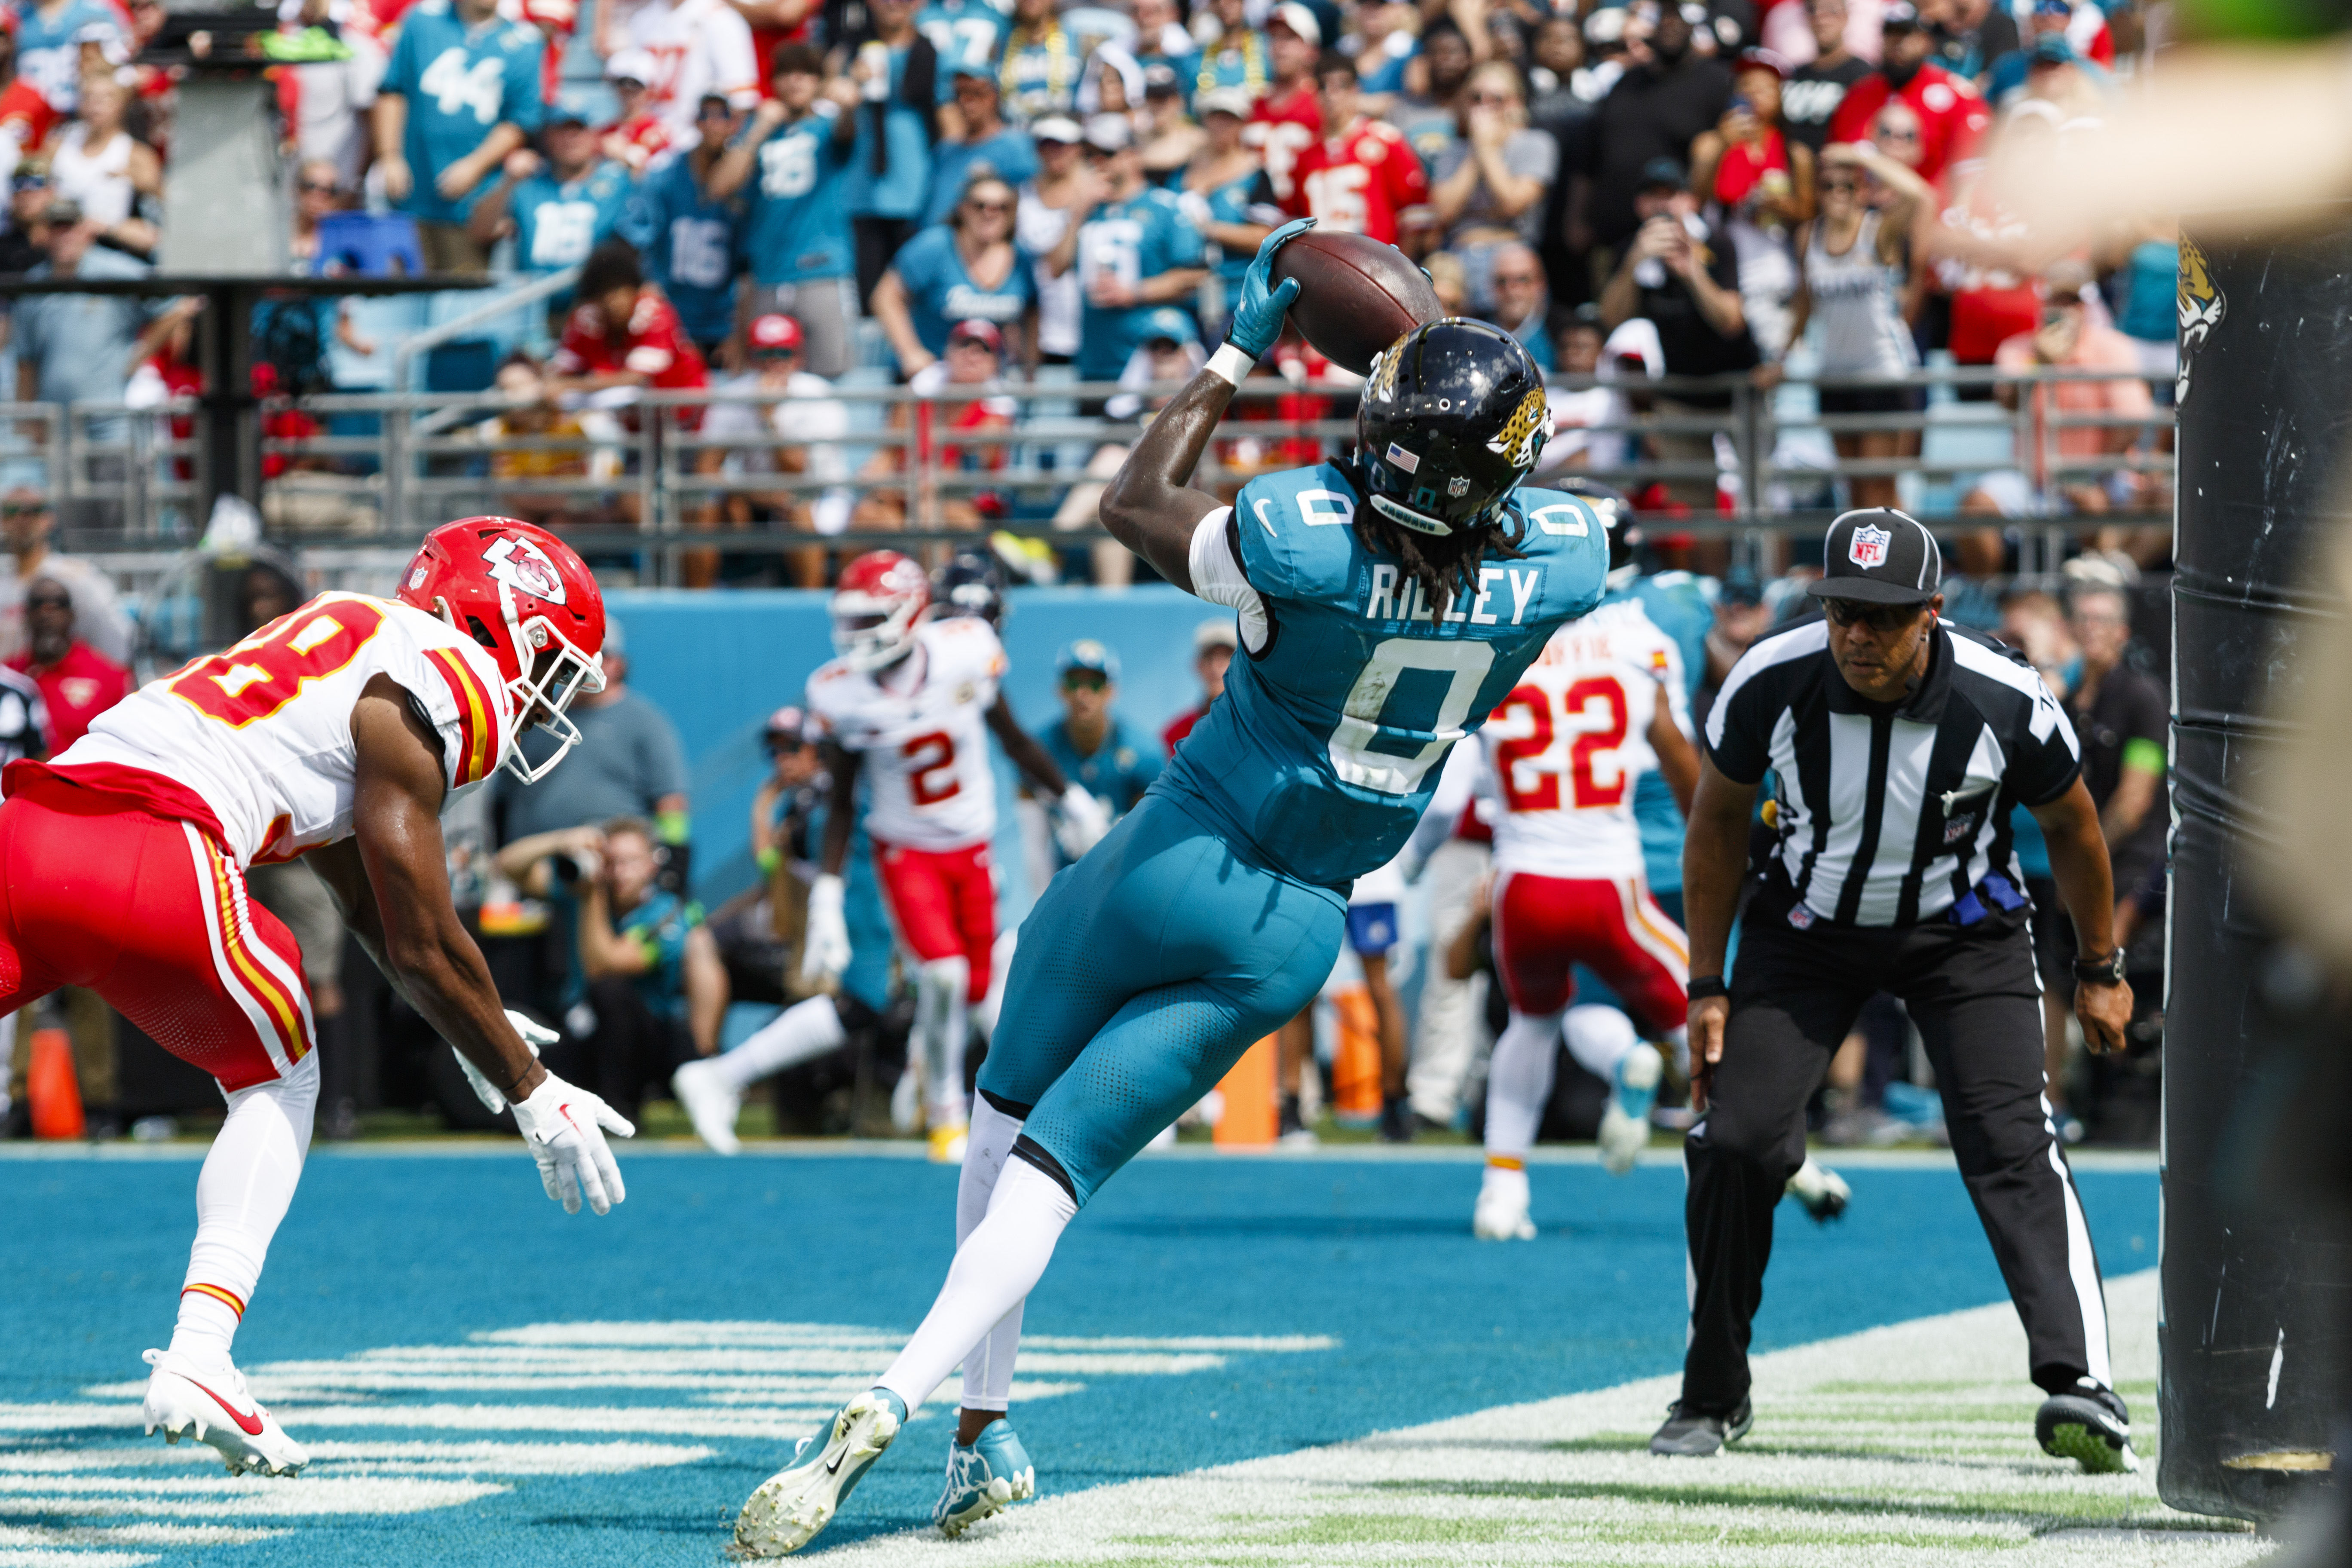 Sep 17, 2023; Jacksonville, Florida, USA; Jacksonville Jaguars wide receiver Calvin Ridley (0) catches a ball just outside of the endzone with pressure from Kansas City Chiefs corner back L'Jarius Sneed (38) during the fourth quarter at EverBank Stadium. Mandatory Credit: Morgan Tencza-USA TODAY Sports